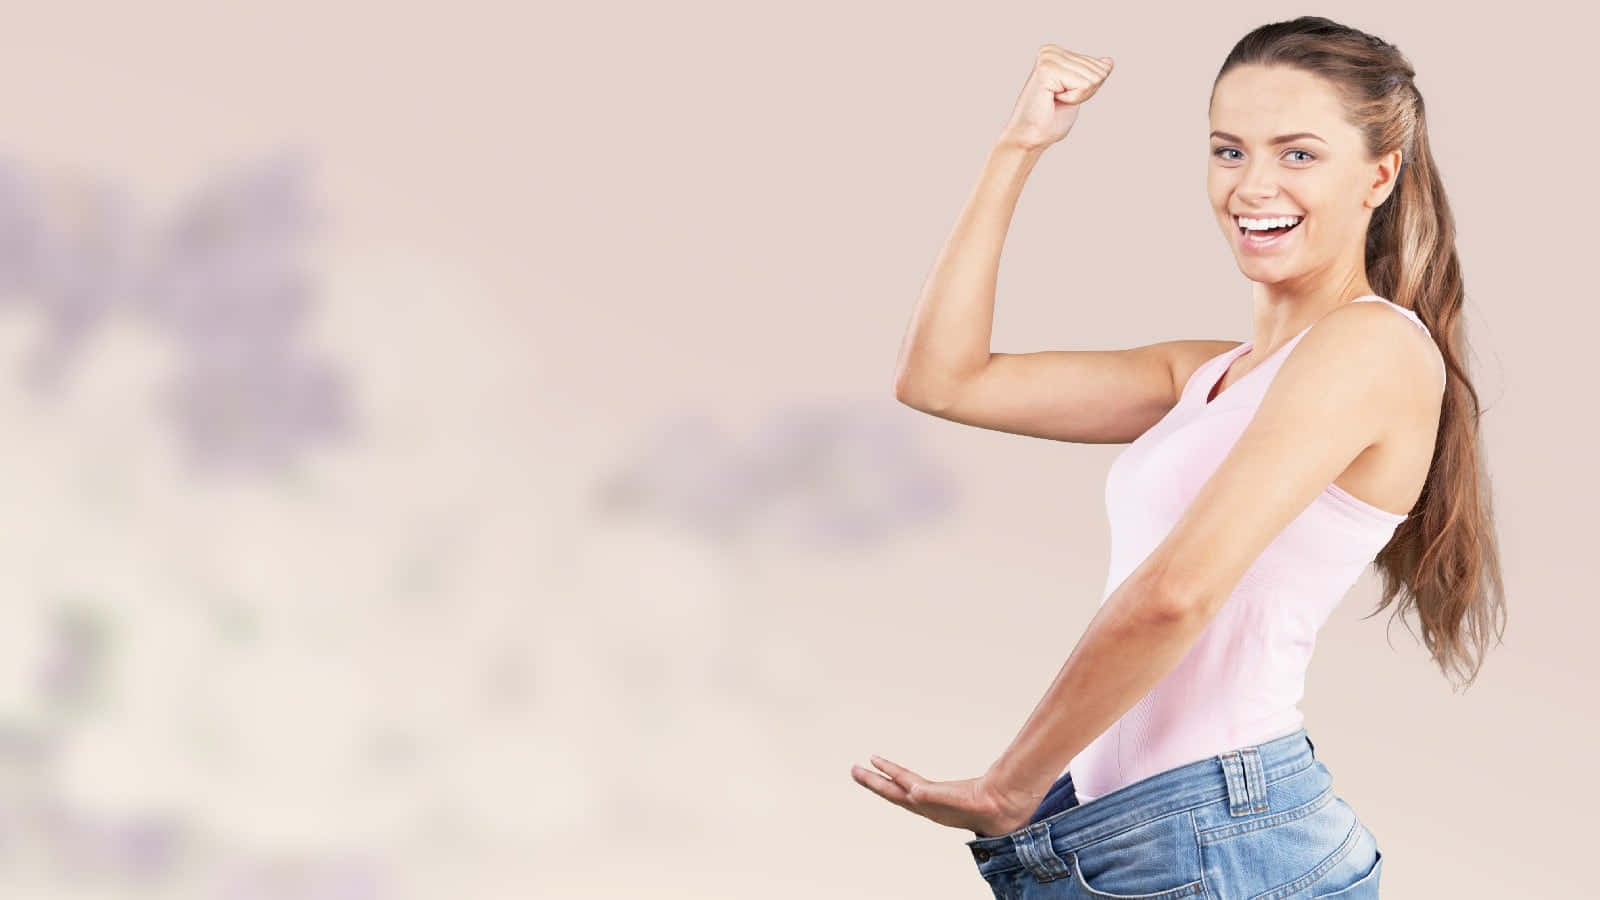 A Woman Is Posing With Her Arms Raised